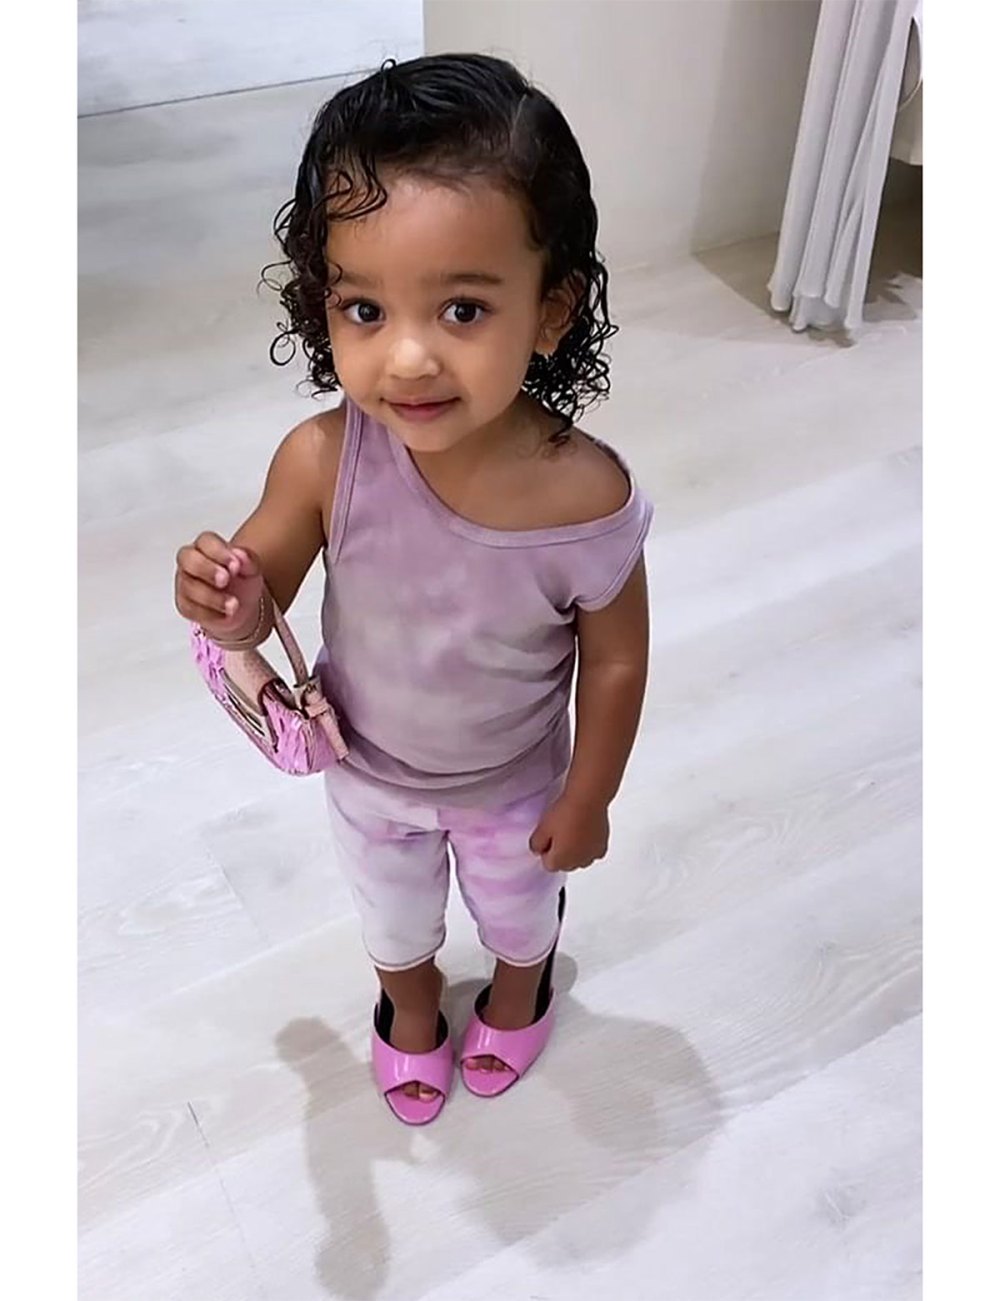 You Have to See Chicago West in Head-to-Toe Pink Wearing Her Mom's Heels